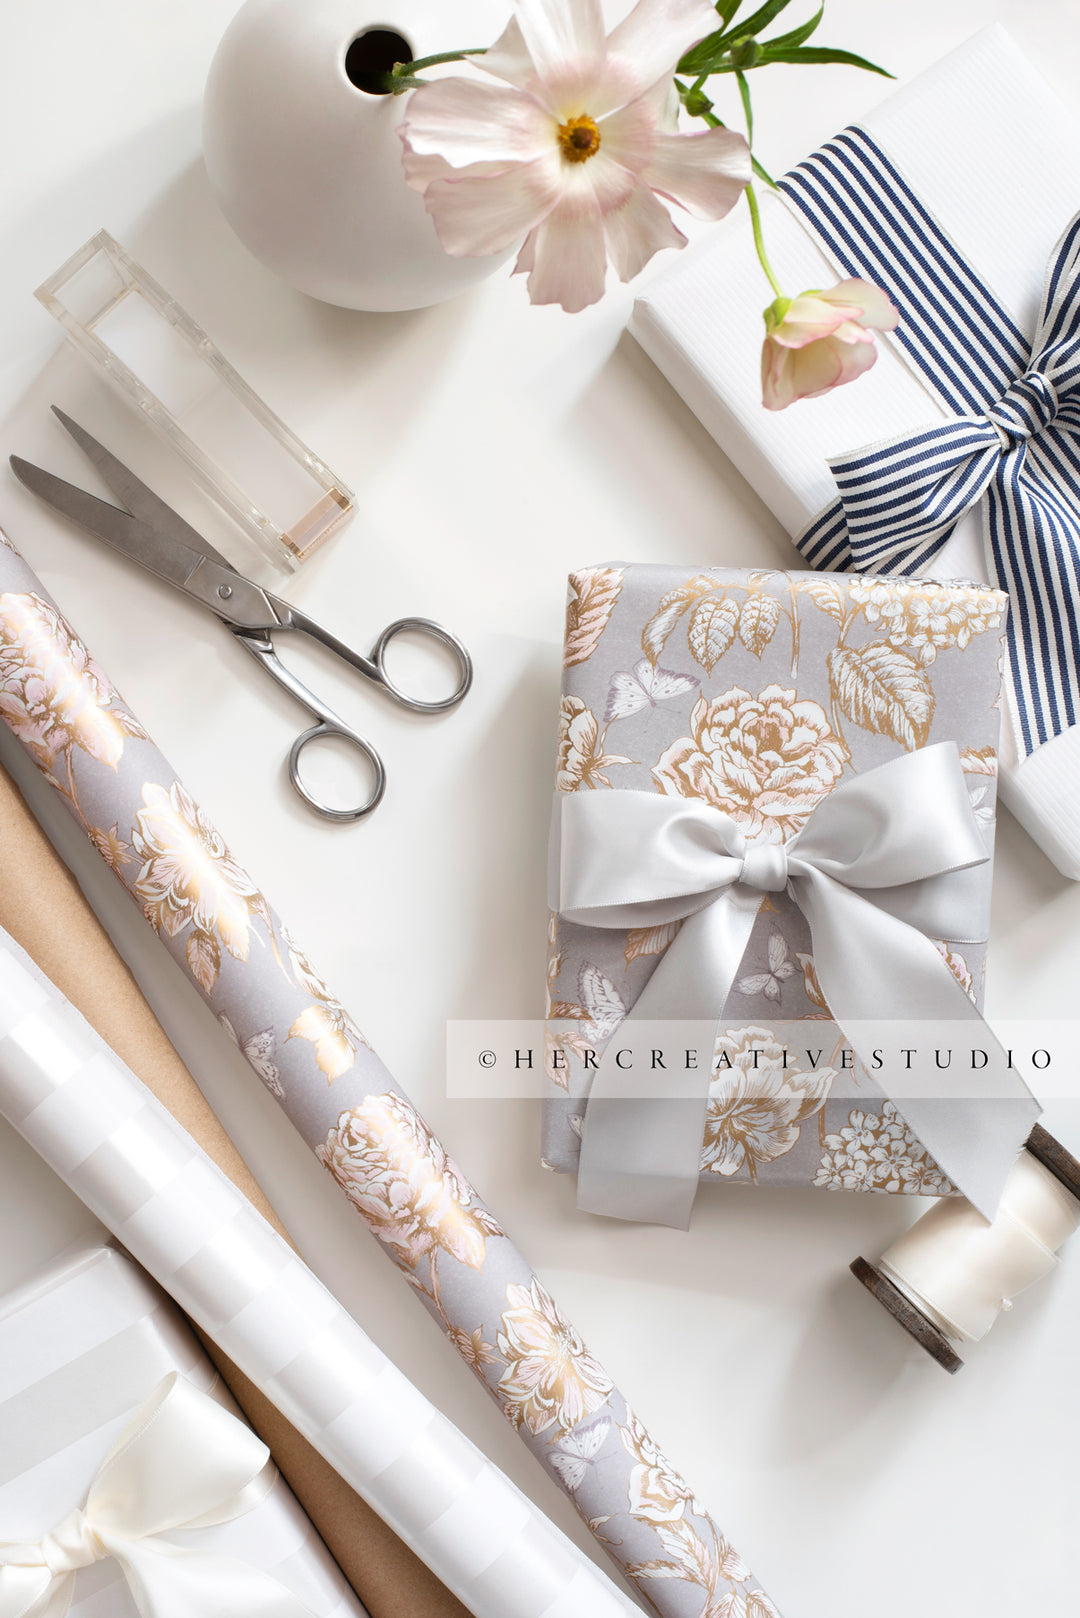 Gifts & Wrapping Paper on White Background. Stock Image